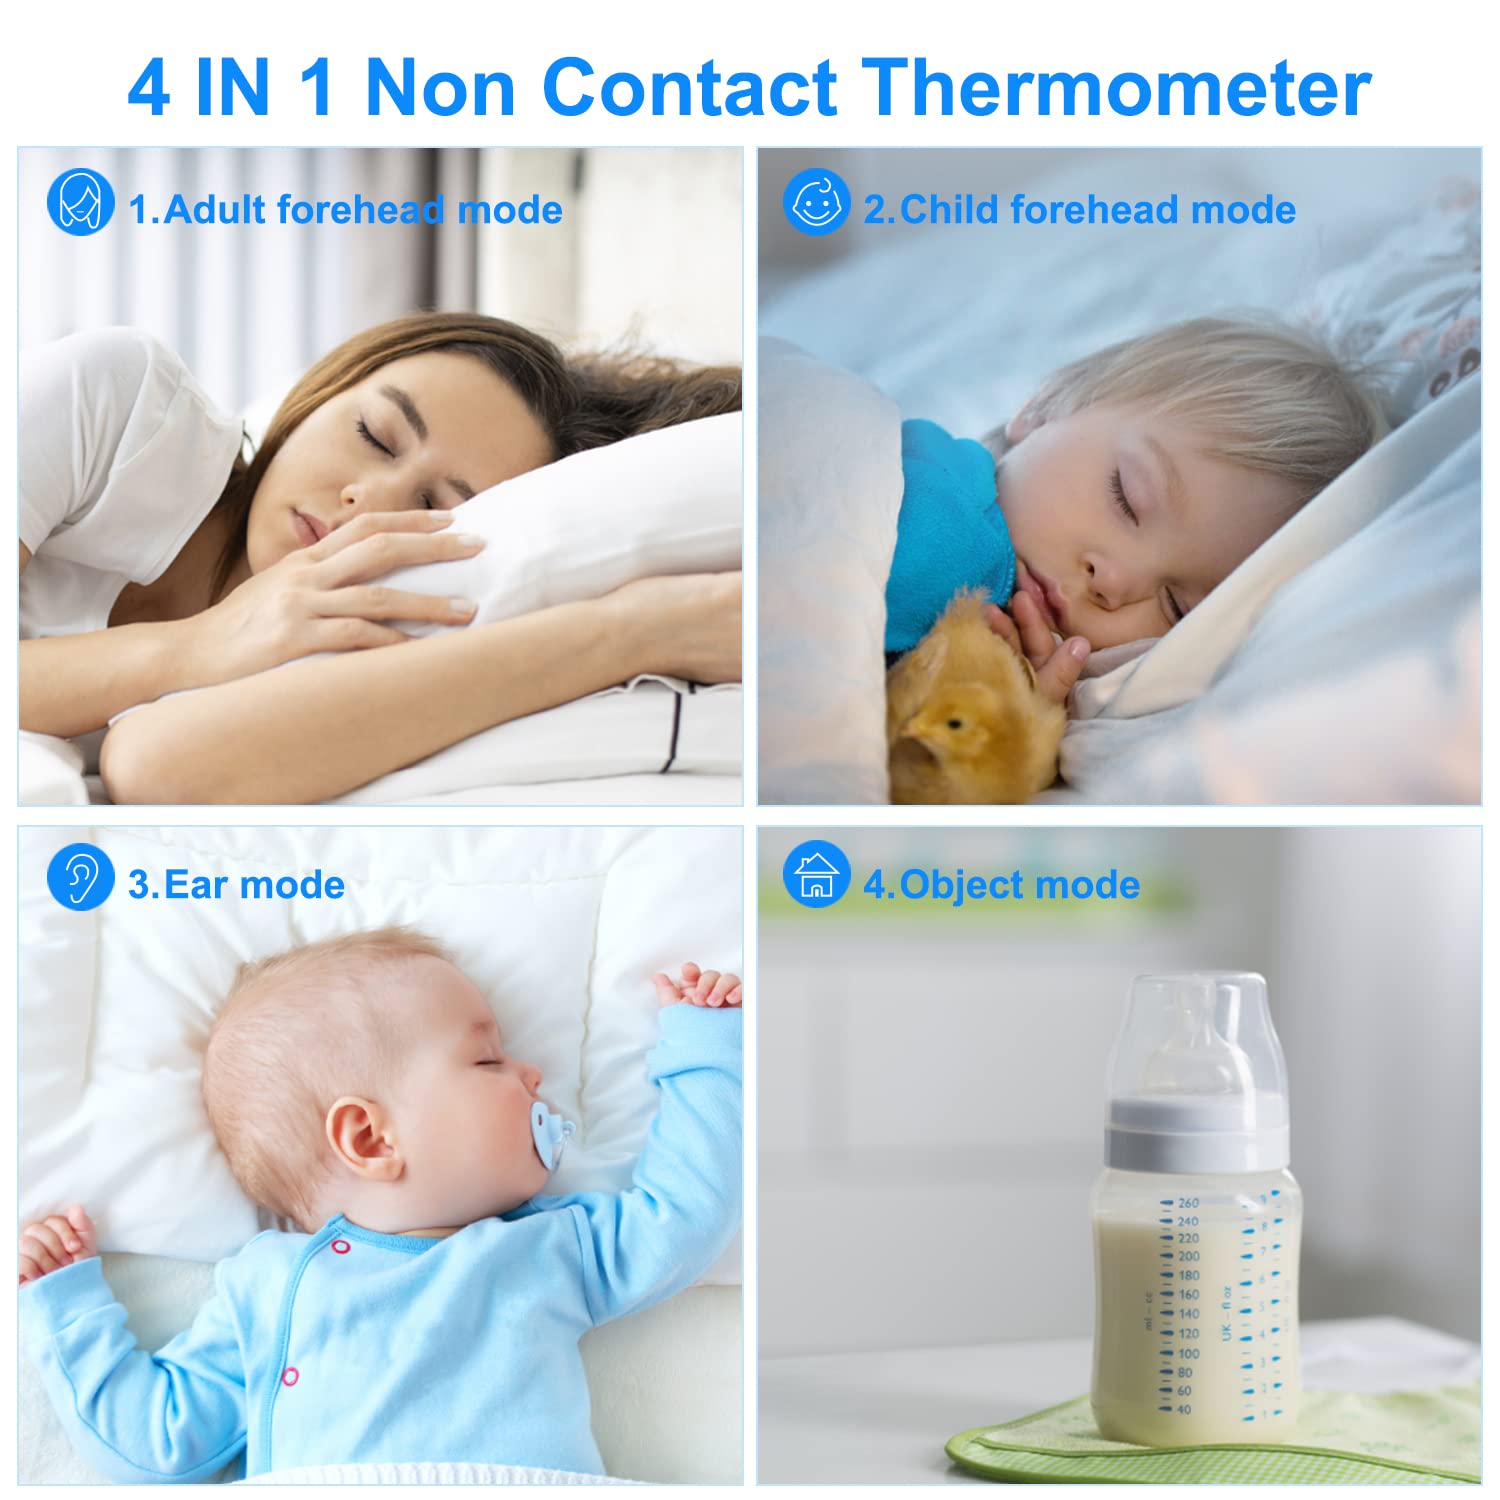 HEAL-CHECK Medical Infrared Thermometer for Baby, Adults, Body Surface Space, Forehead and Ear Thermometer, Memory Function, 1 Second Measurement, Age Selection, Magnetic Switching. : Baby